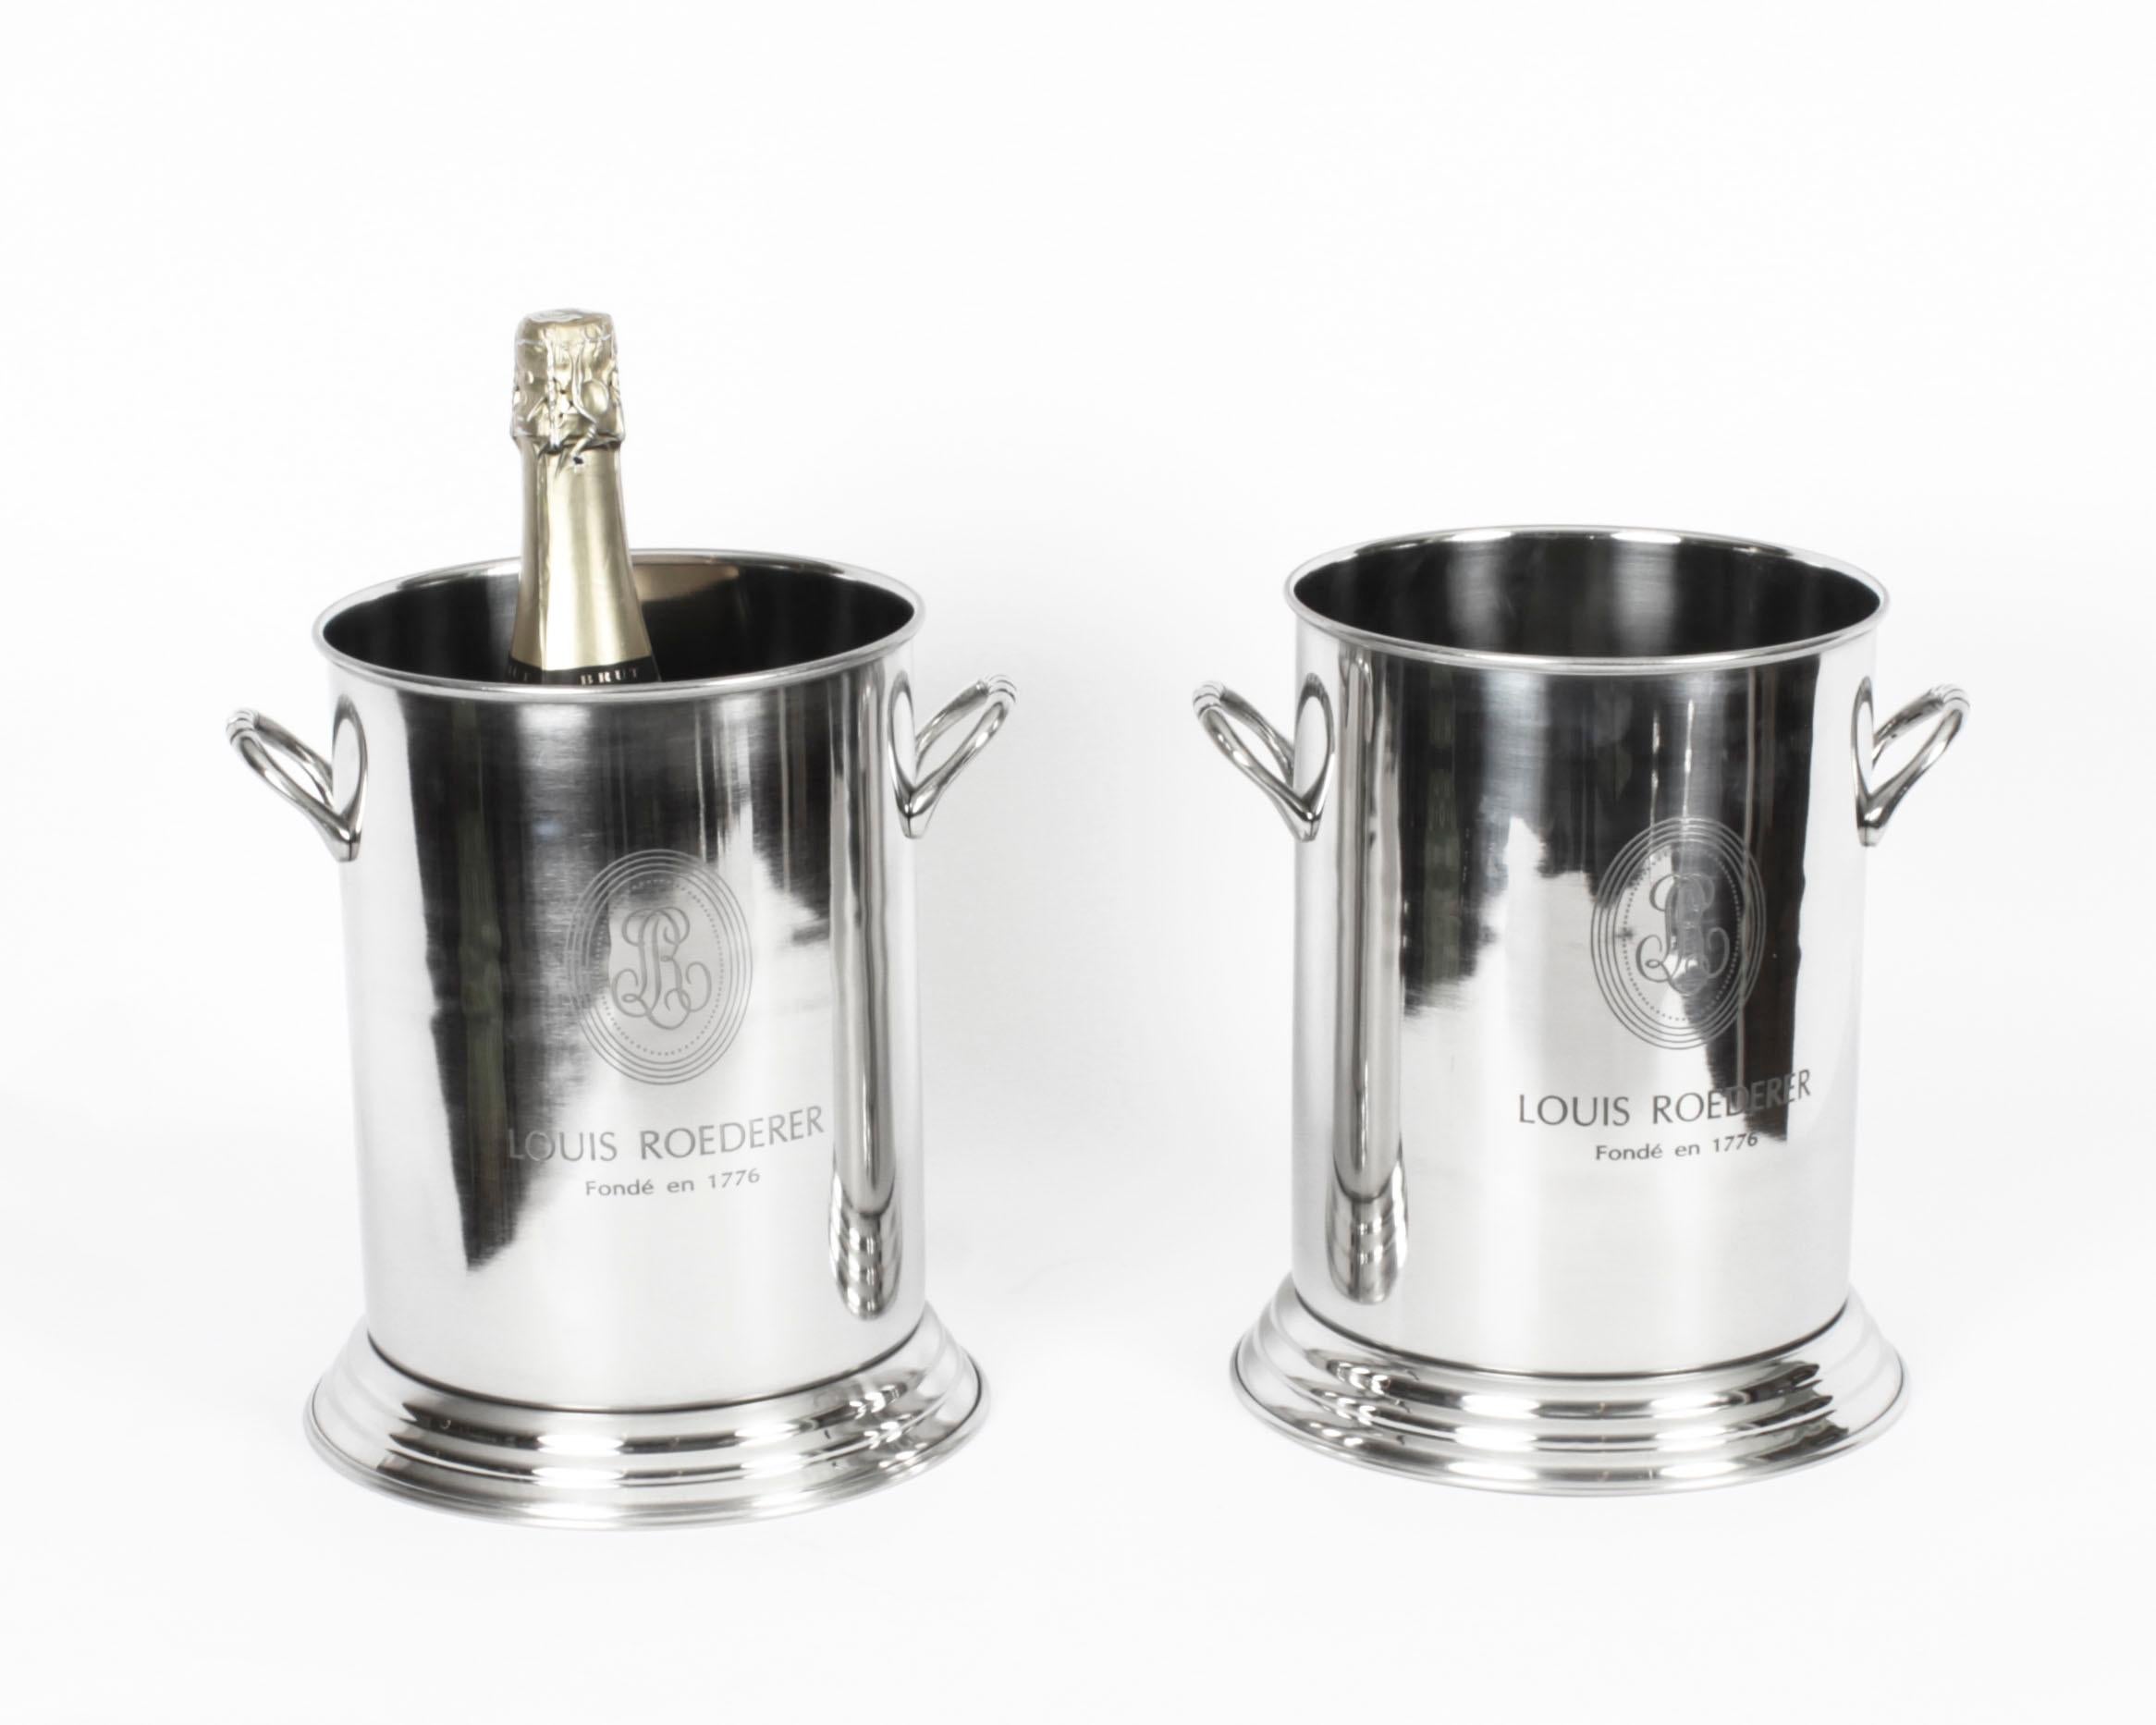 This is a gorgeous vintage pair of silver plated champagne / wine coolers. 

They are each boldly engraved  Louis Roederer Fonde en 1776 on the sides with the LR logo.

Each cooler has twin carrying handles and there is no mistaking the unique